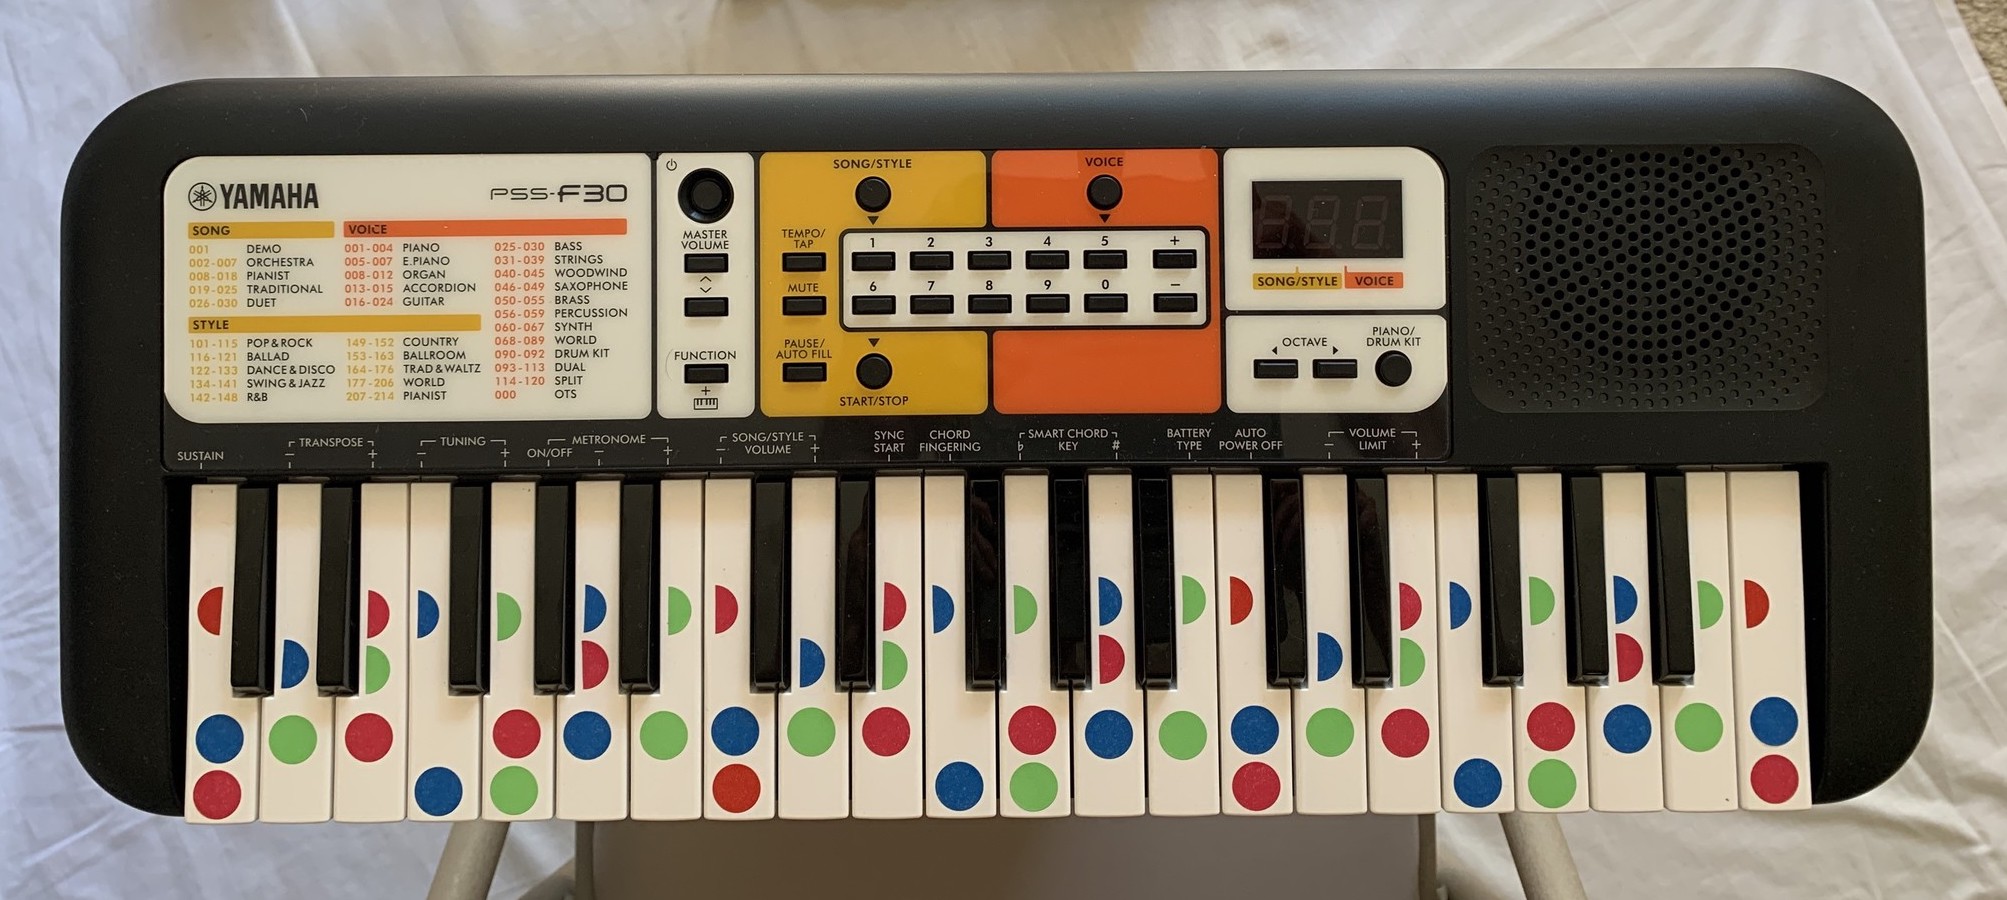 keyboard (37 mini-keys) with color coding